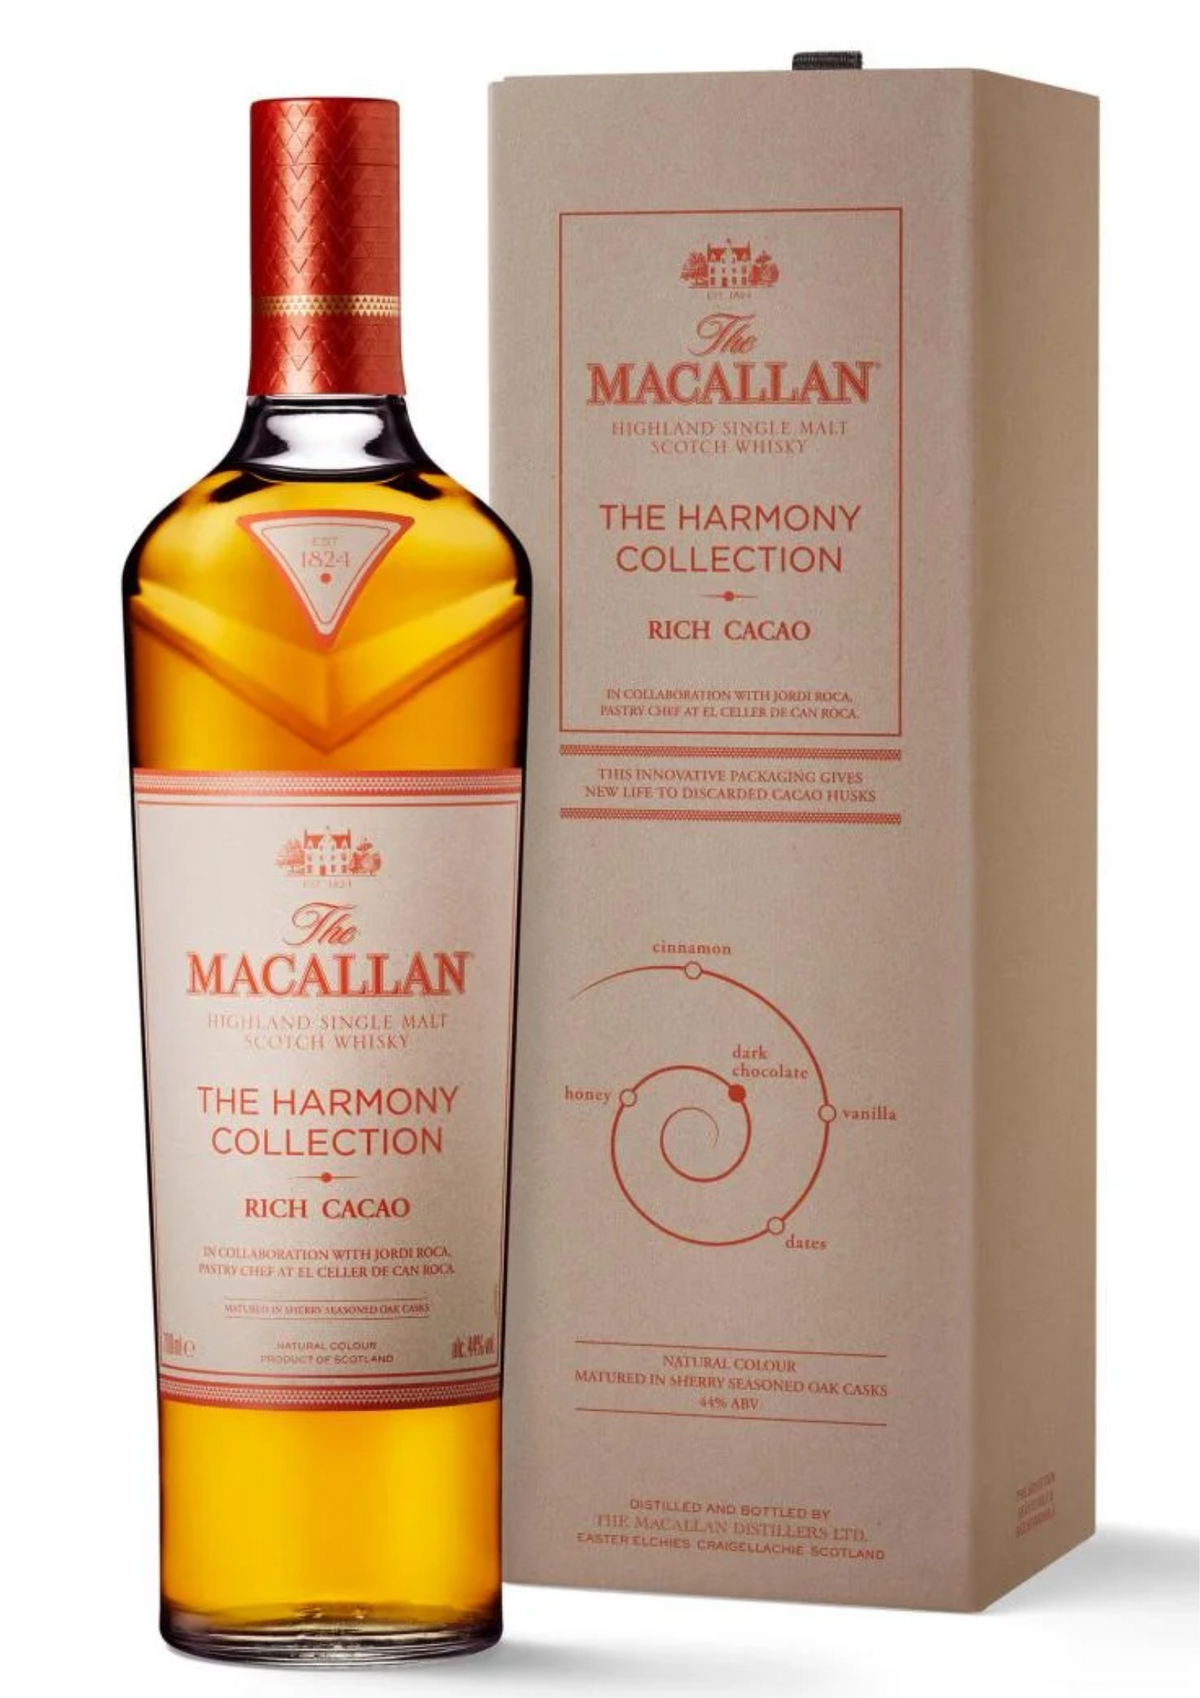 The Macallan Harmony Collection, Rich Cacao, Single Malt Scotch Whisky, 44%